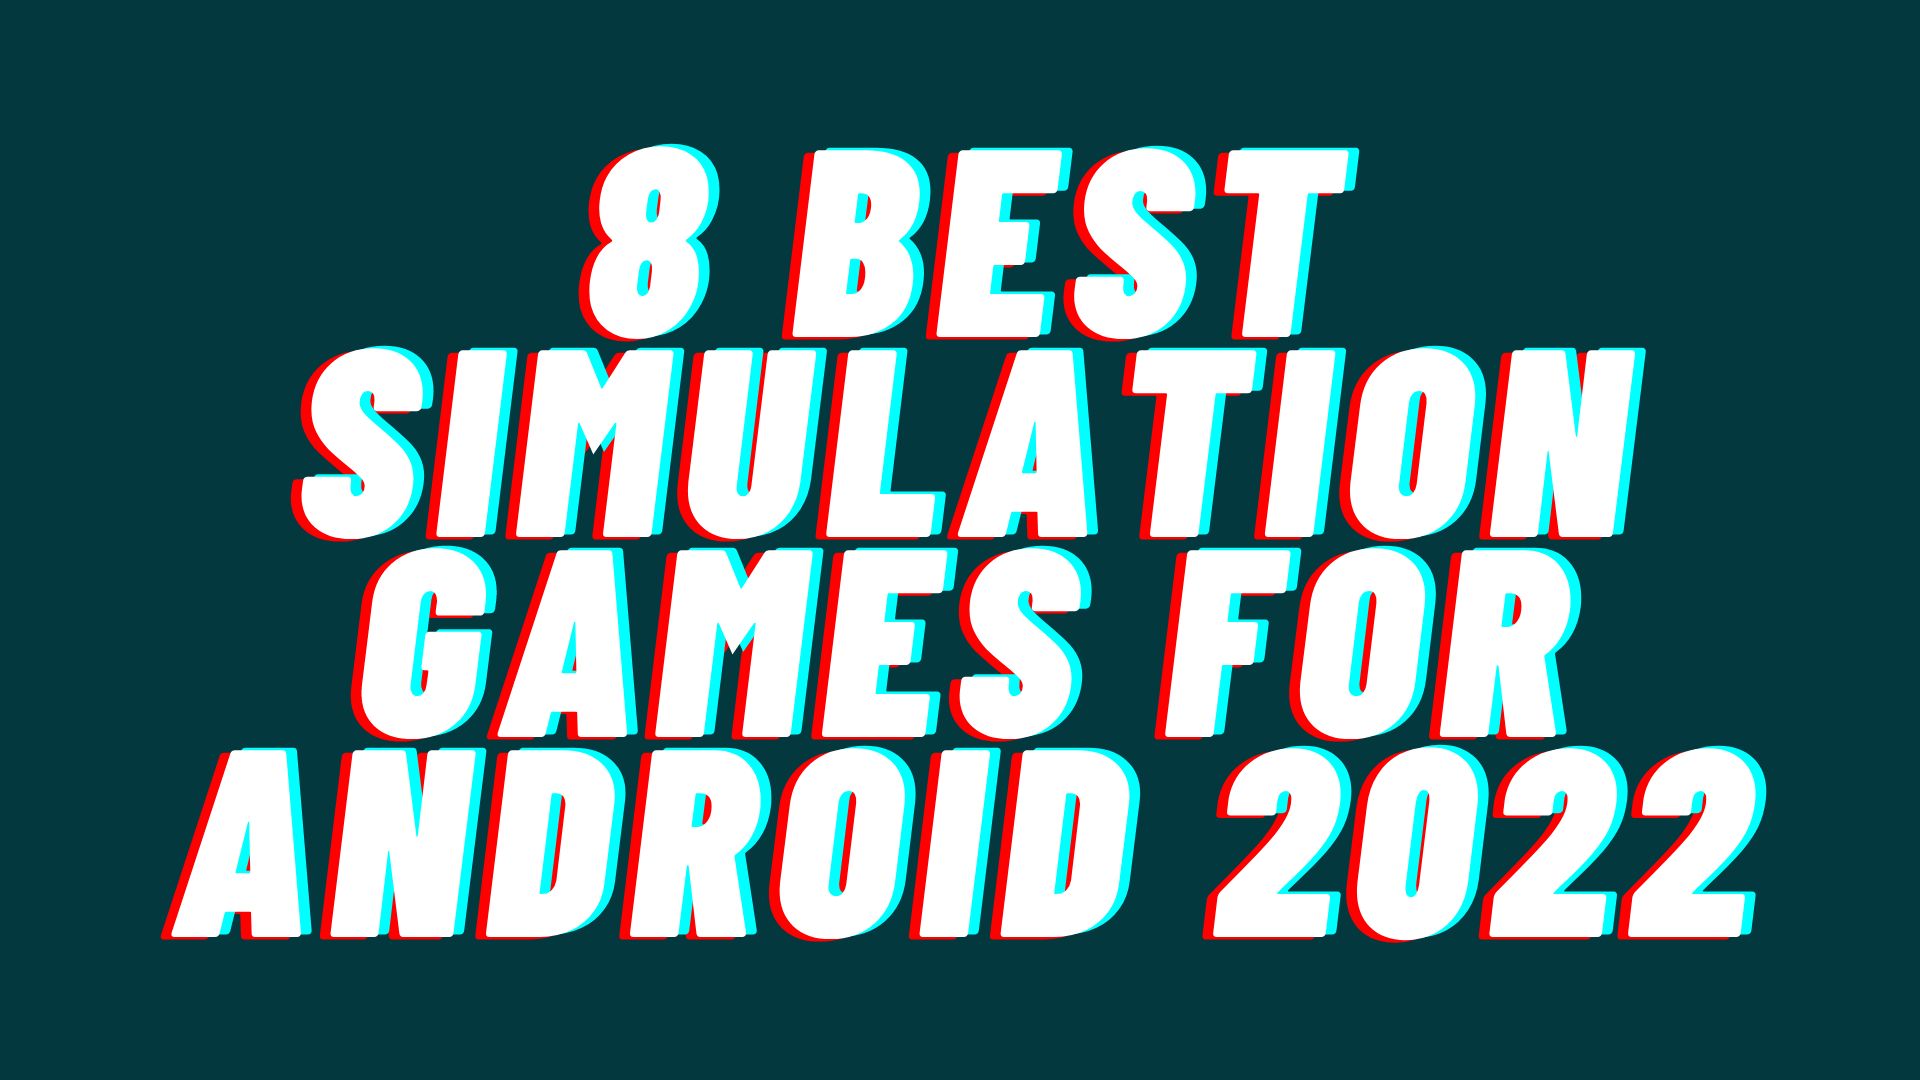 8 Best Simulation Games for Android 2022